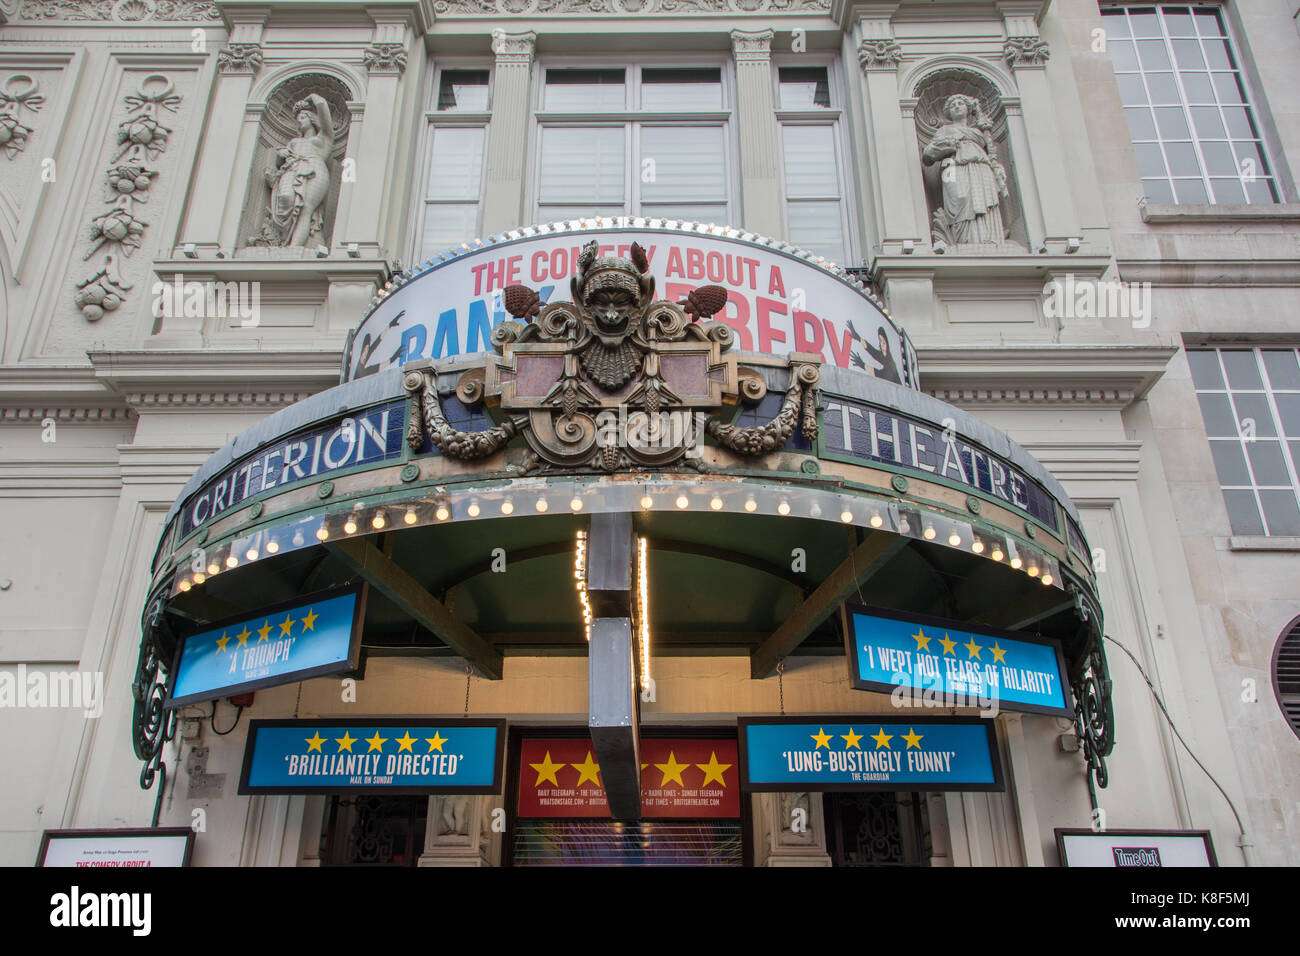 The exterior of the Criterion Theatre in Piccadilly Circus in London's West End. Stock Photo